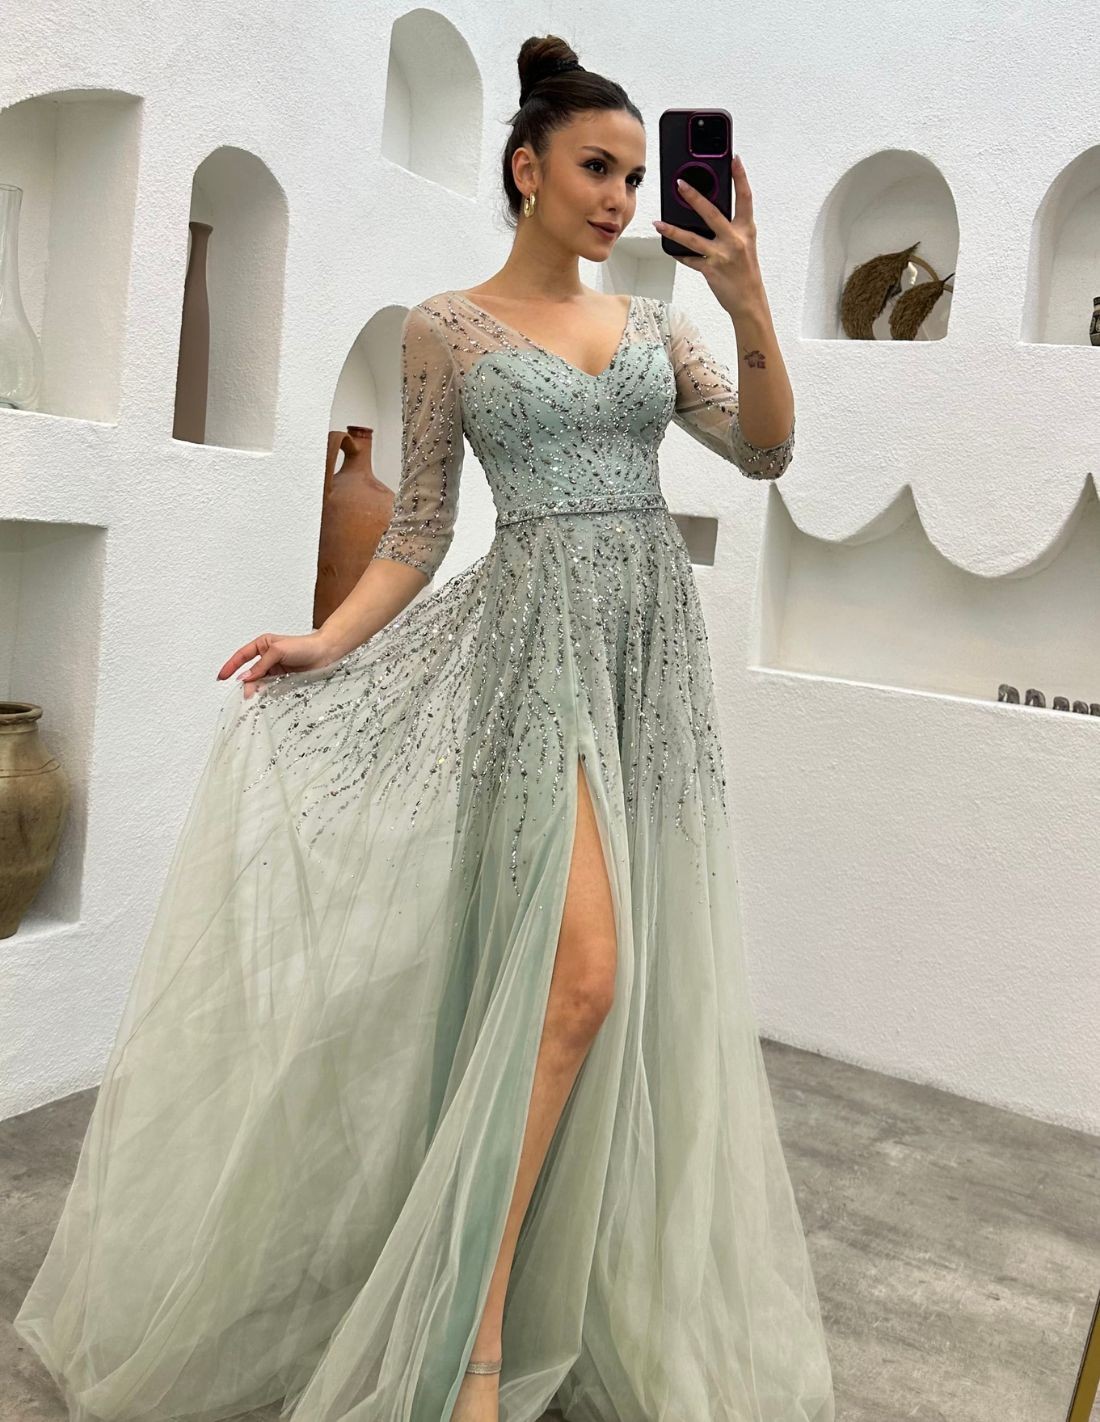 Long Embroidered Sheer-Corset Prom Ball Gown